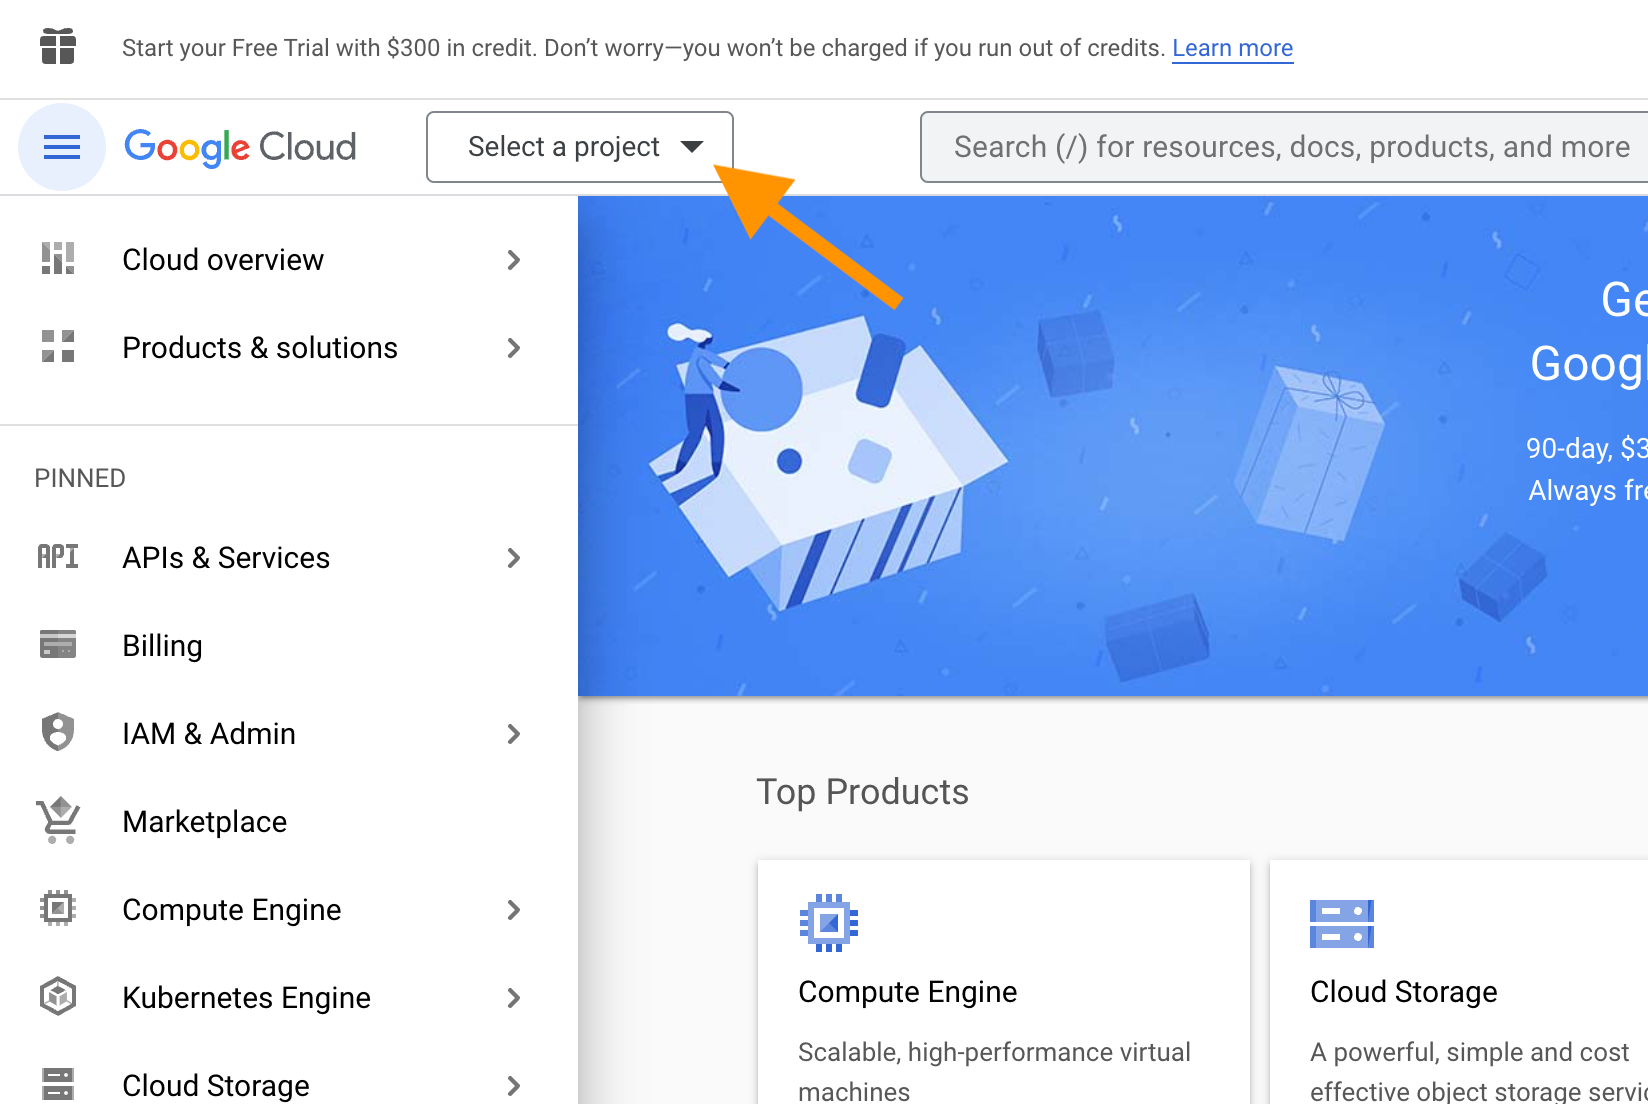 Screenshot with an arrow pointing at the "Select a project" button, which is in the upper left, next to "Google Cloud".